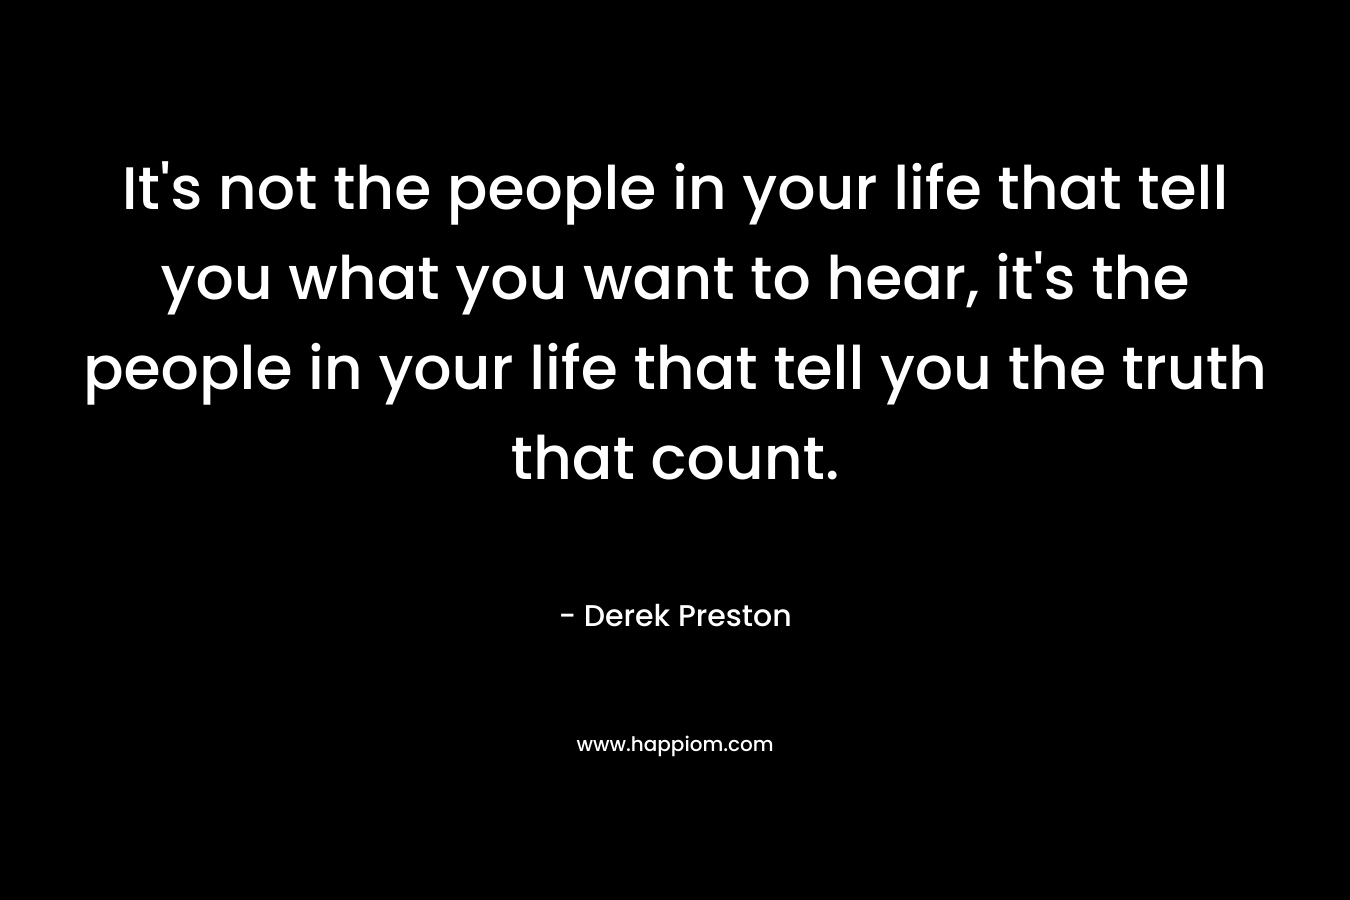 It's not the people in your life that tell you what you want to hear, it's the people in your life that tell you the truth that count.